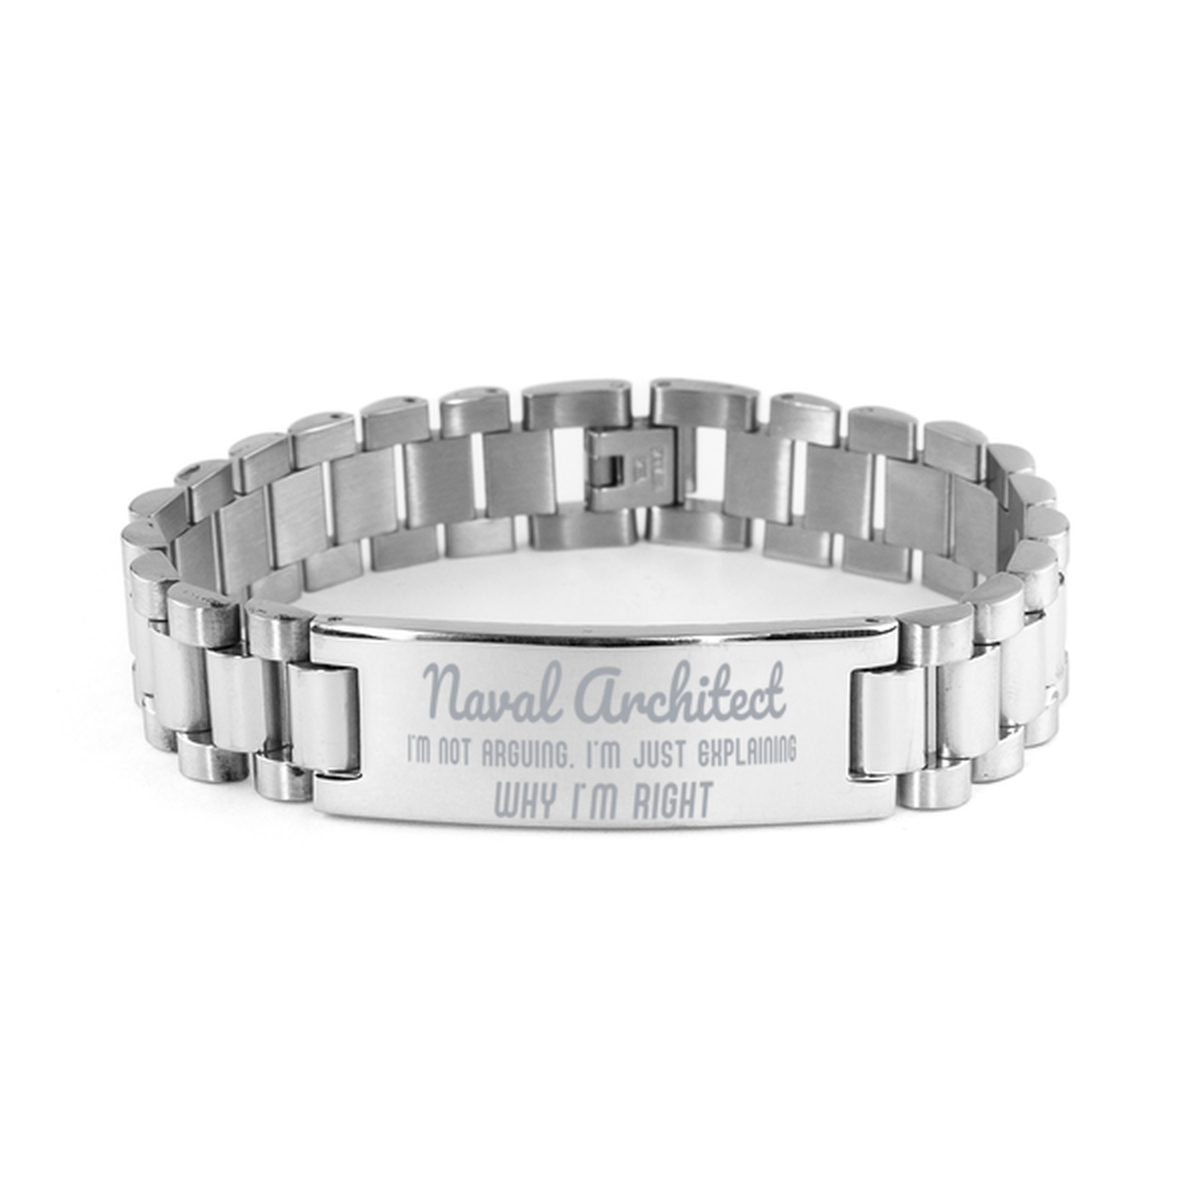 Naval Architect I'm not Arguing. I'm Just Explaining Why I'm RIGHT Ladder Stainless Steel Bracelet, Graduation Birthday Christmas Naval Architect Gifts For Naval Architect Funny Saying Quote Present for Men Women Coworker